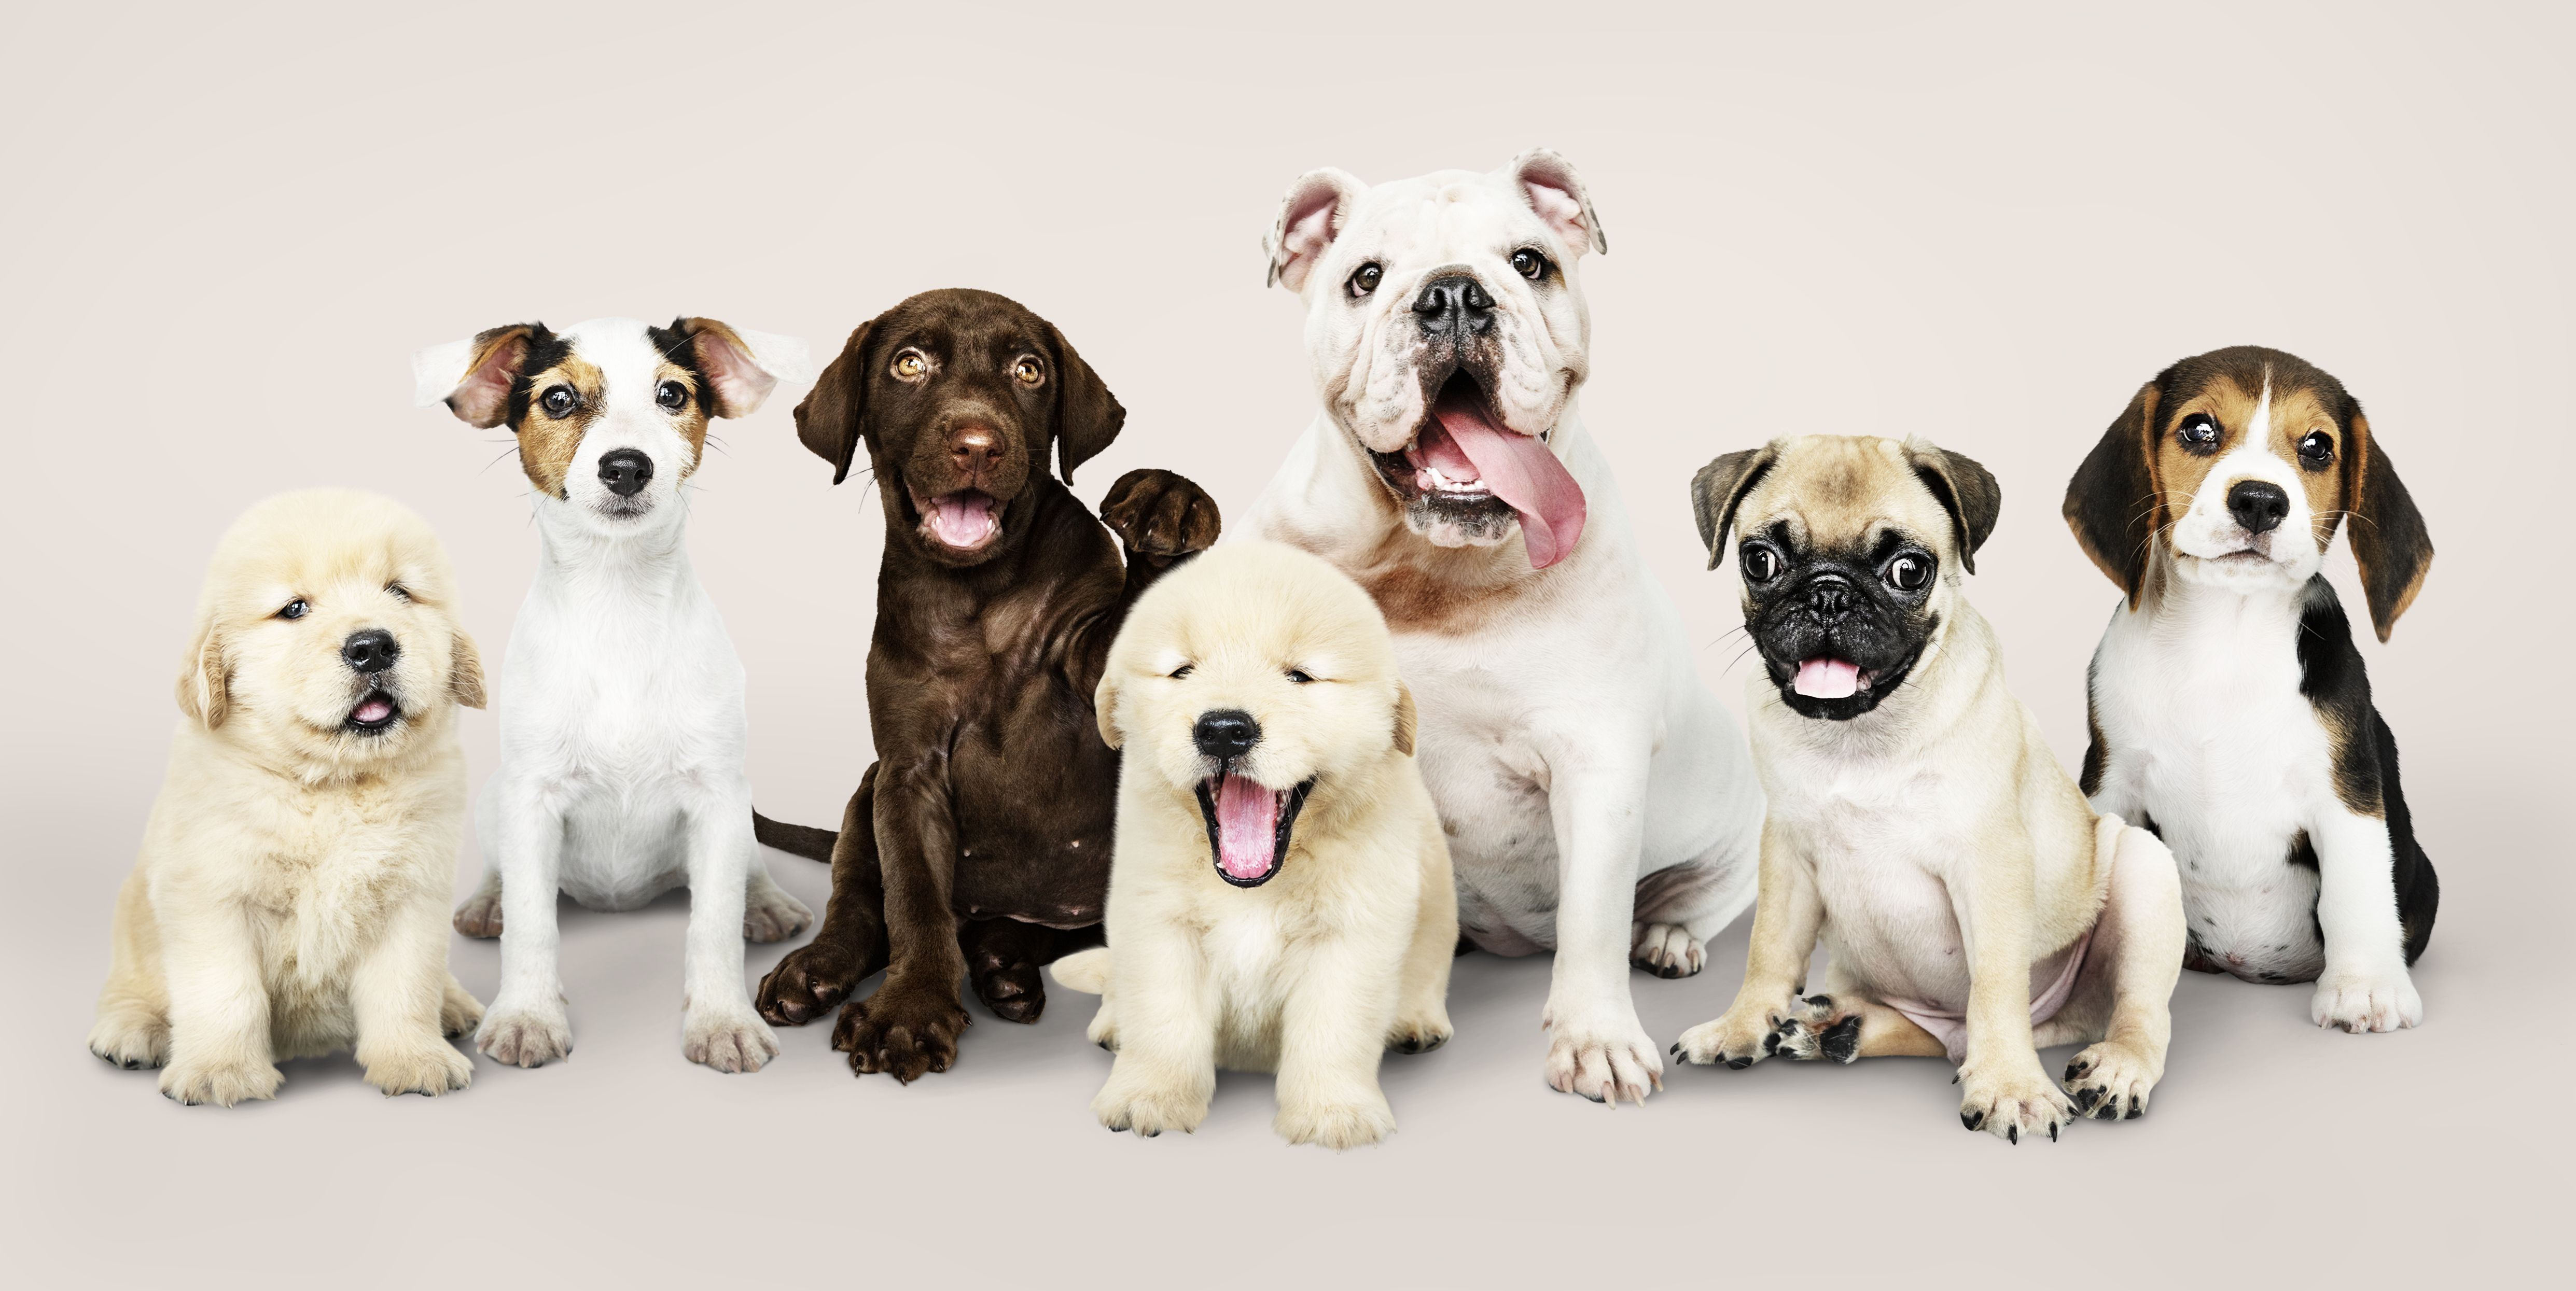 https://hips.hearstapps.com/hmg-prod/images/group-portrait-of-adorable-puppies-royalty-free-image-1687451786.jpg